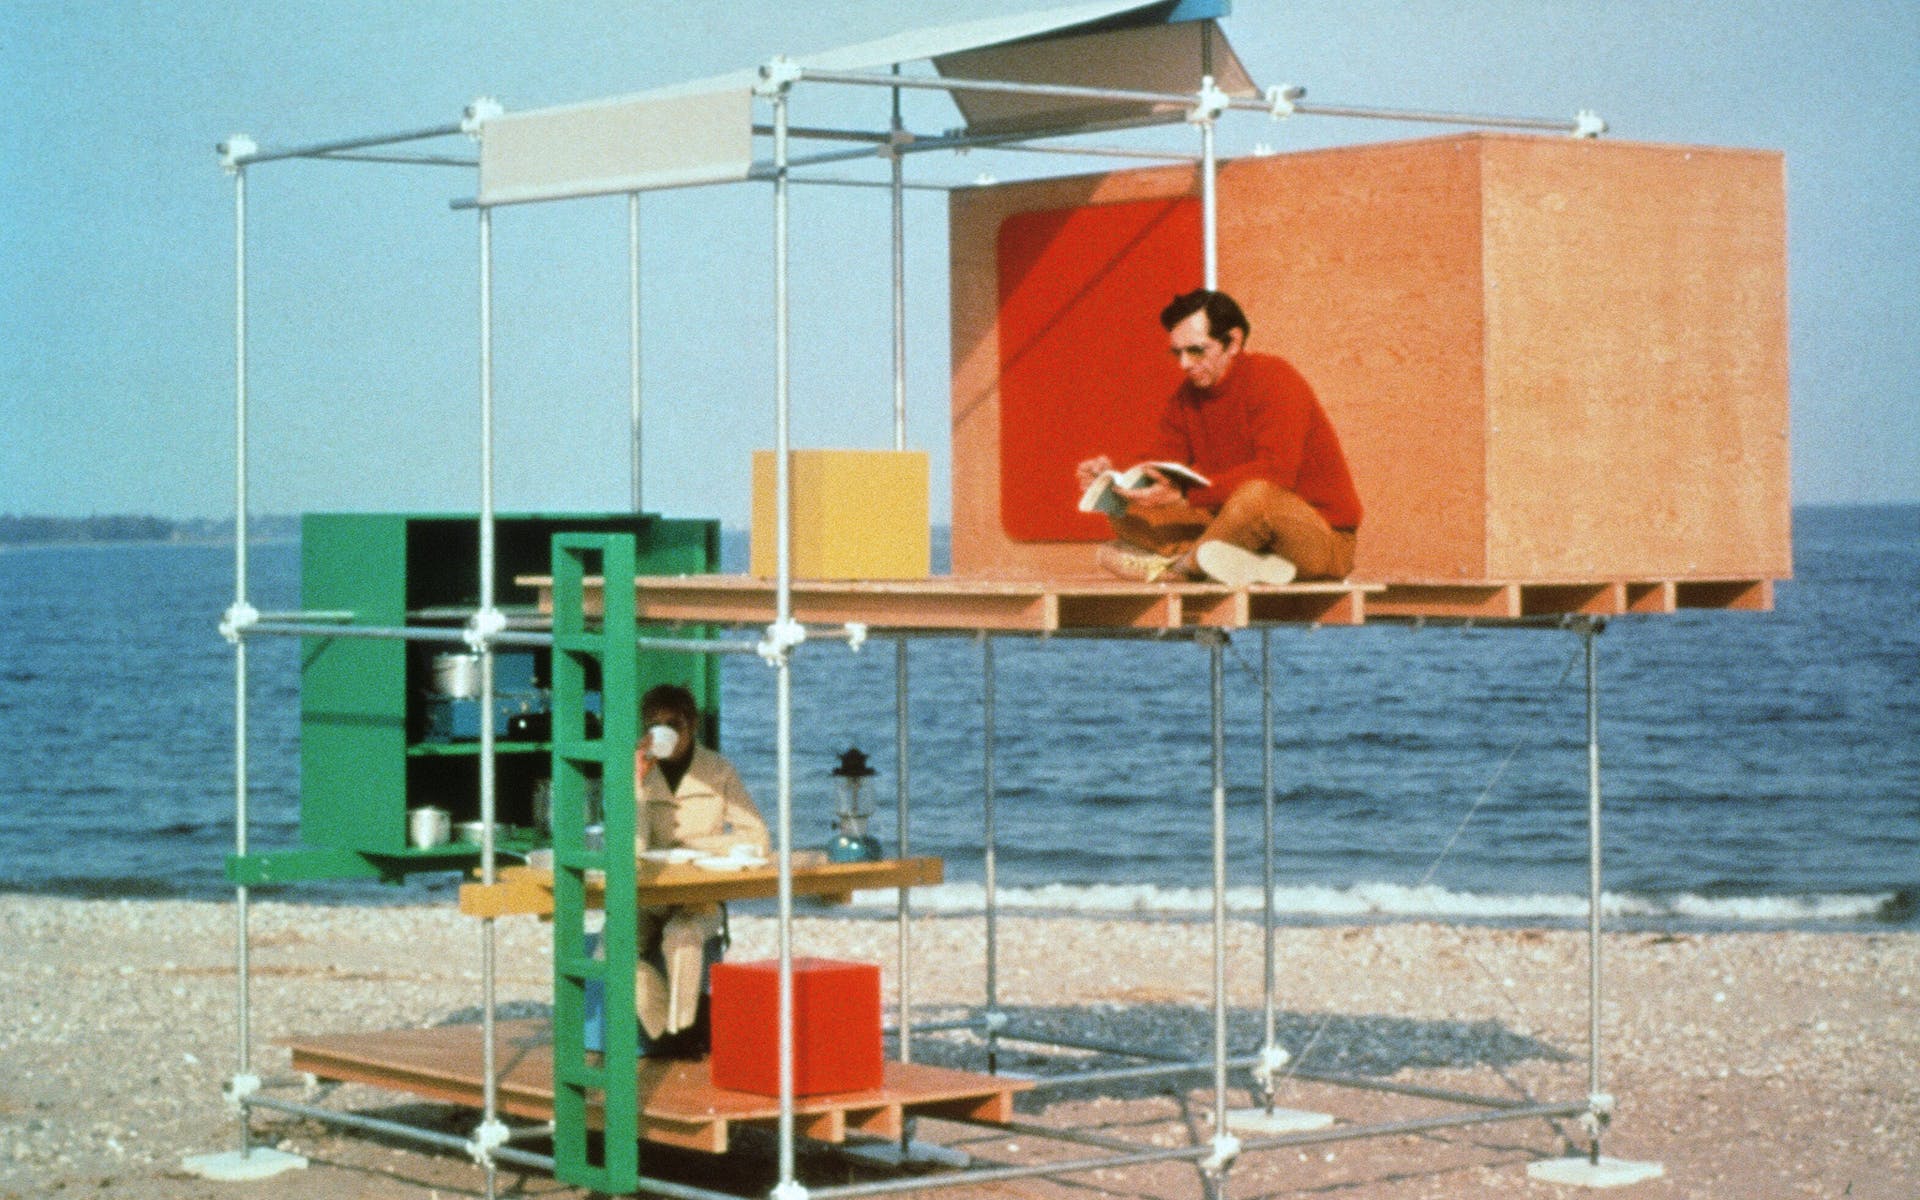 Two men sitting in a two-story structure made of metal poles and wooden panels on the beach